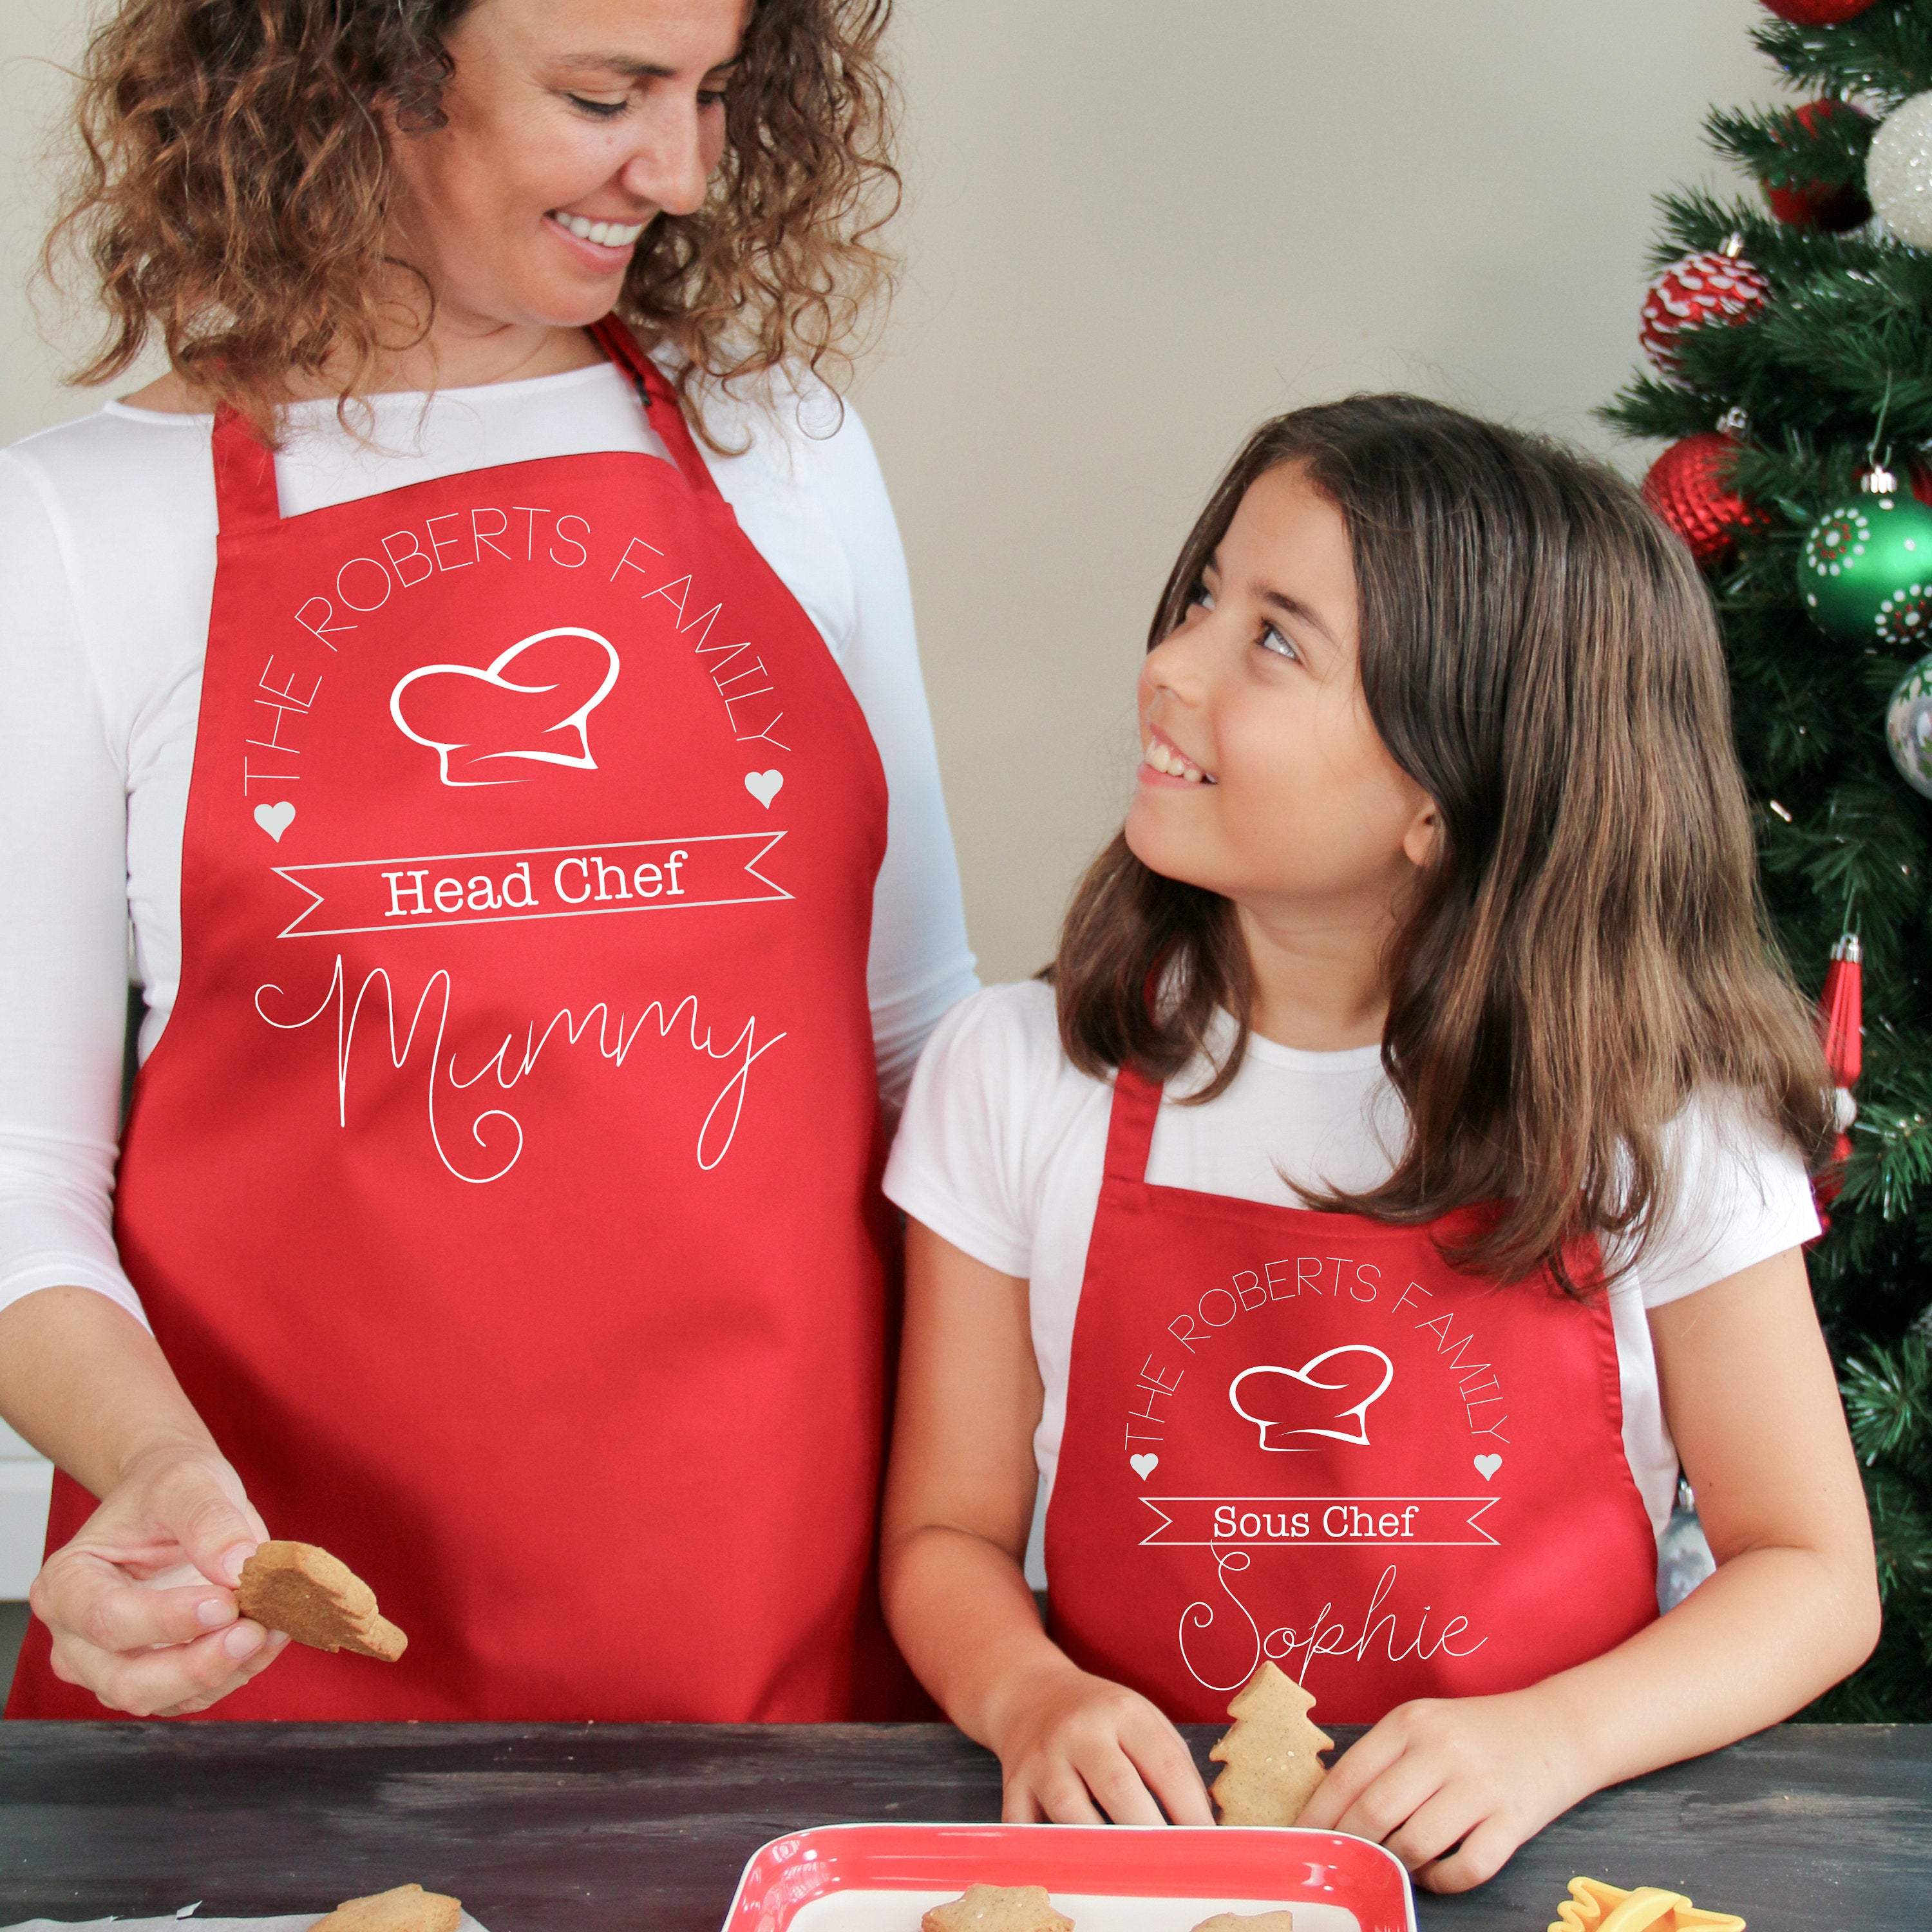 Matching head chef sous chef family aprons with names, Mum, dad, son and daughter aprons